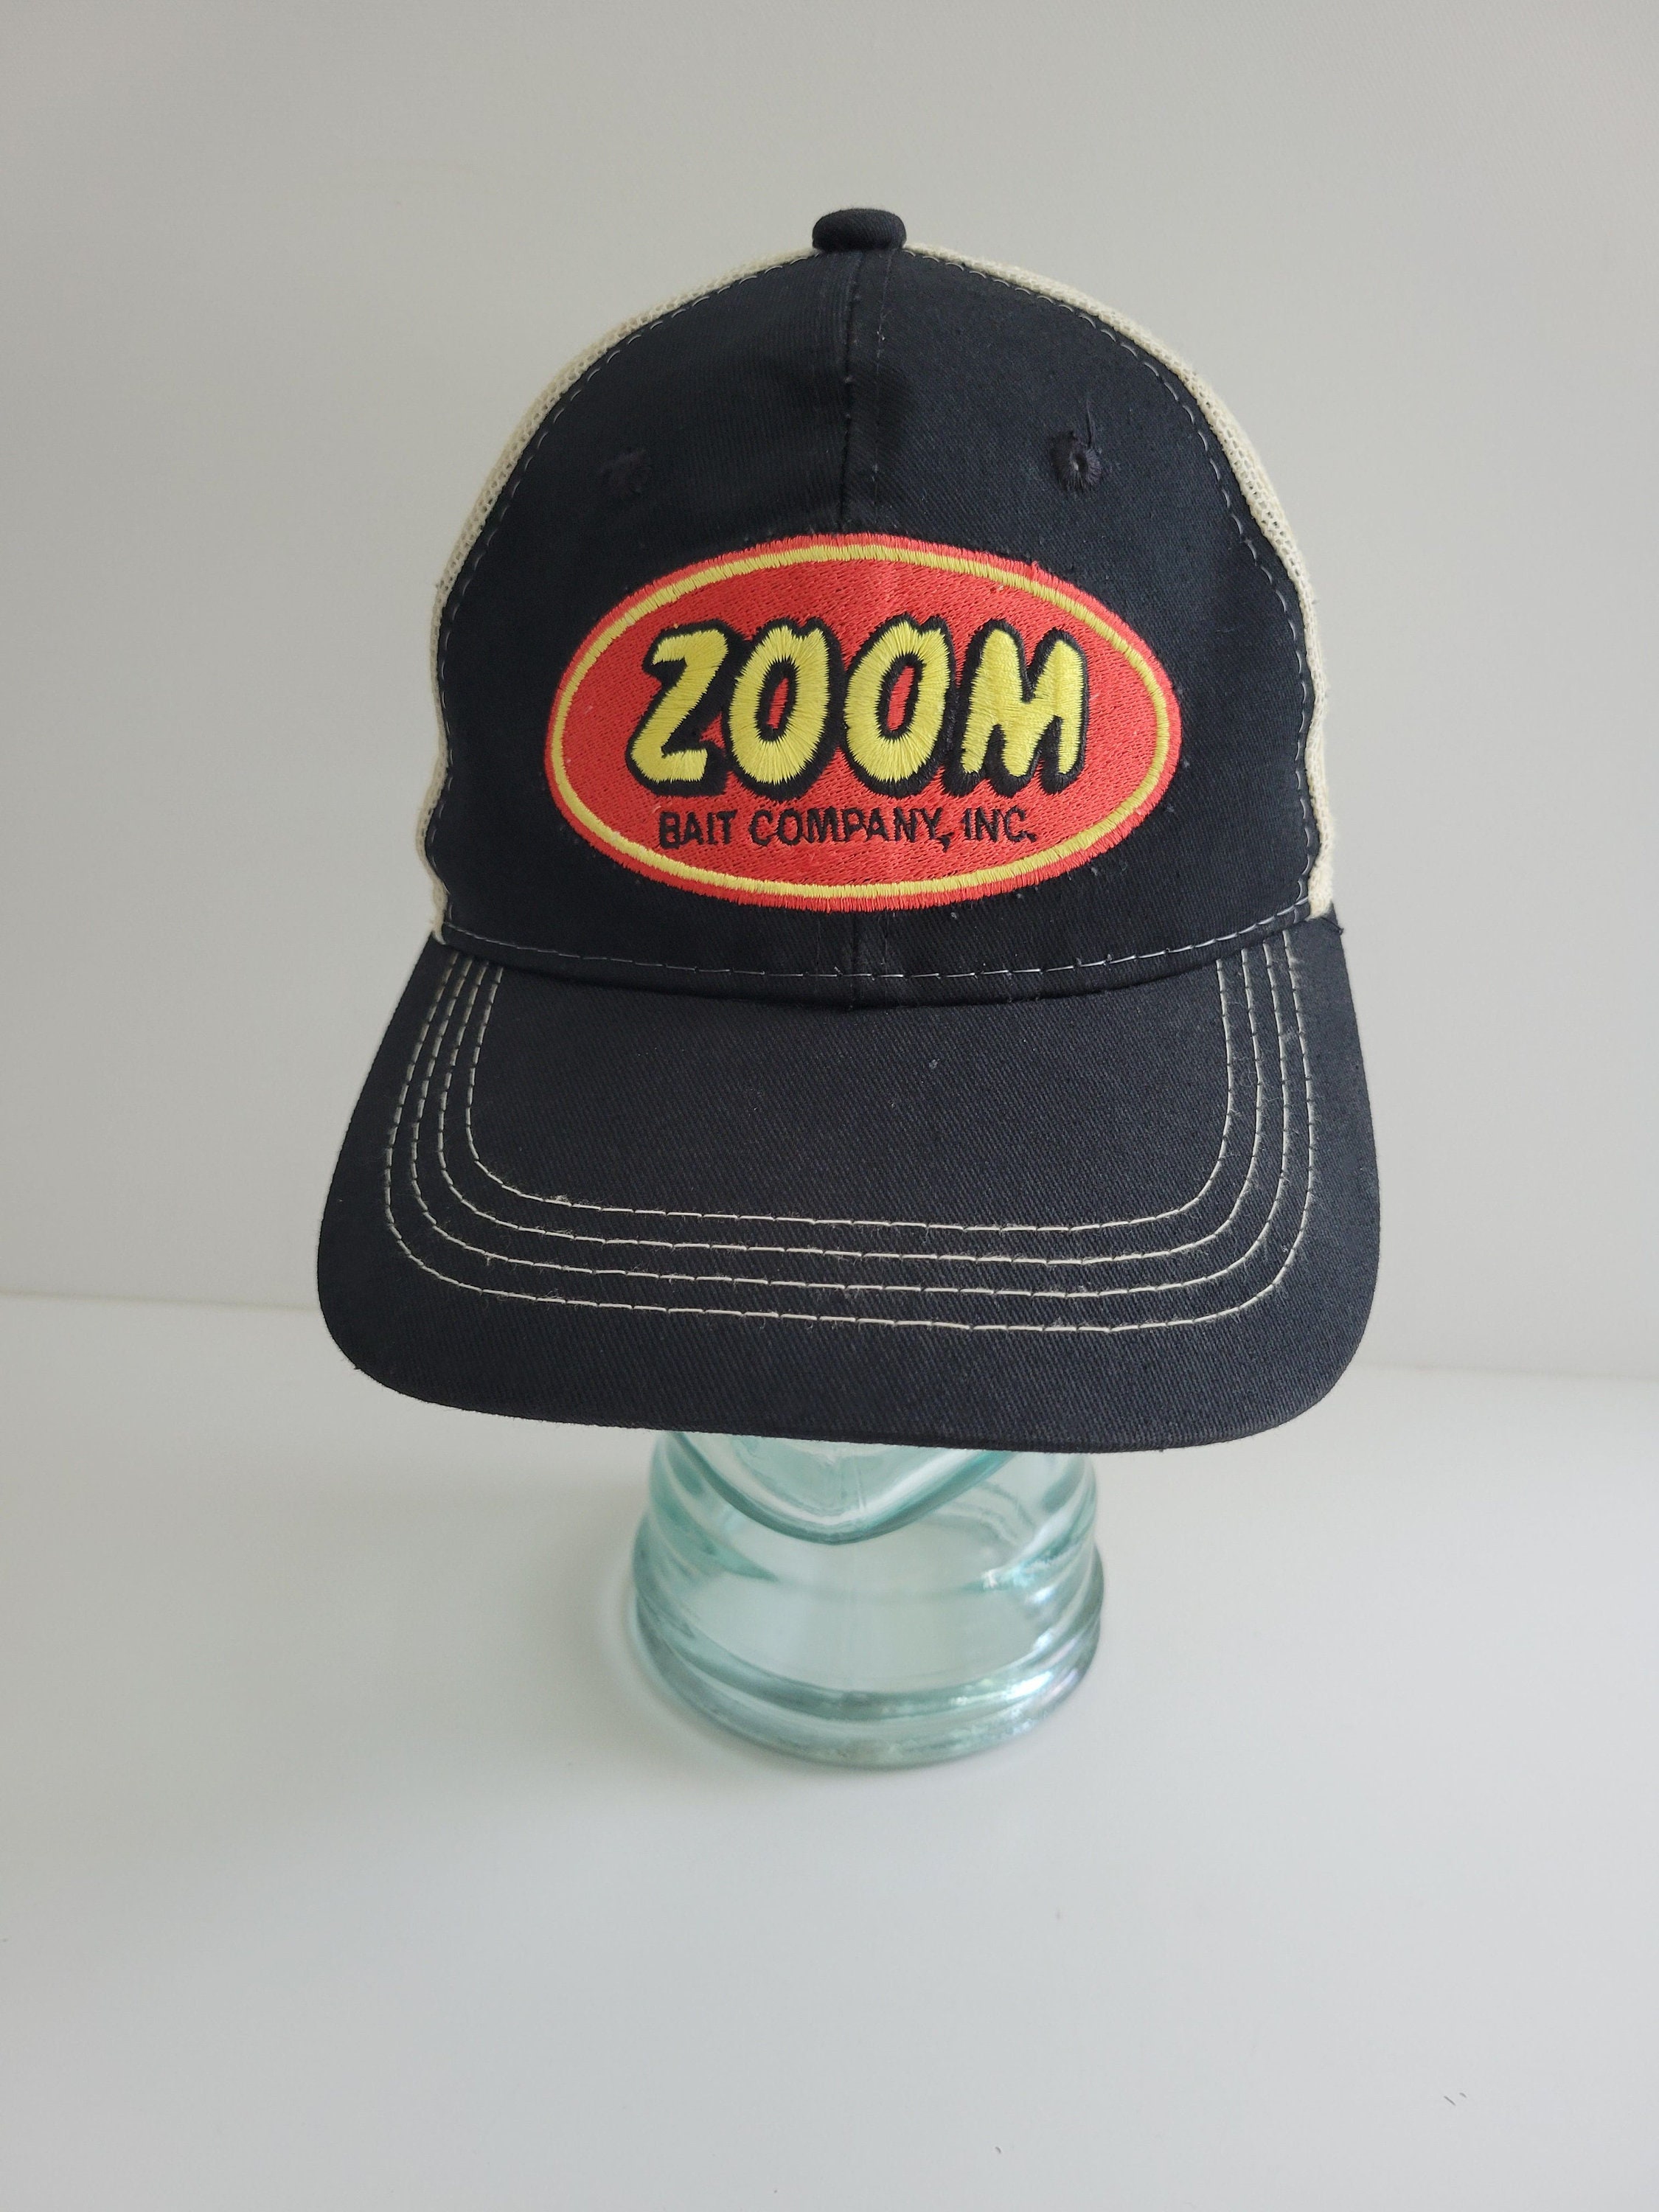 NOS Zoom Bait Company Mesh Back Black and Cream Hat -  Canada